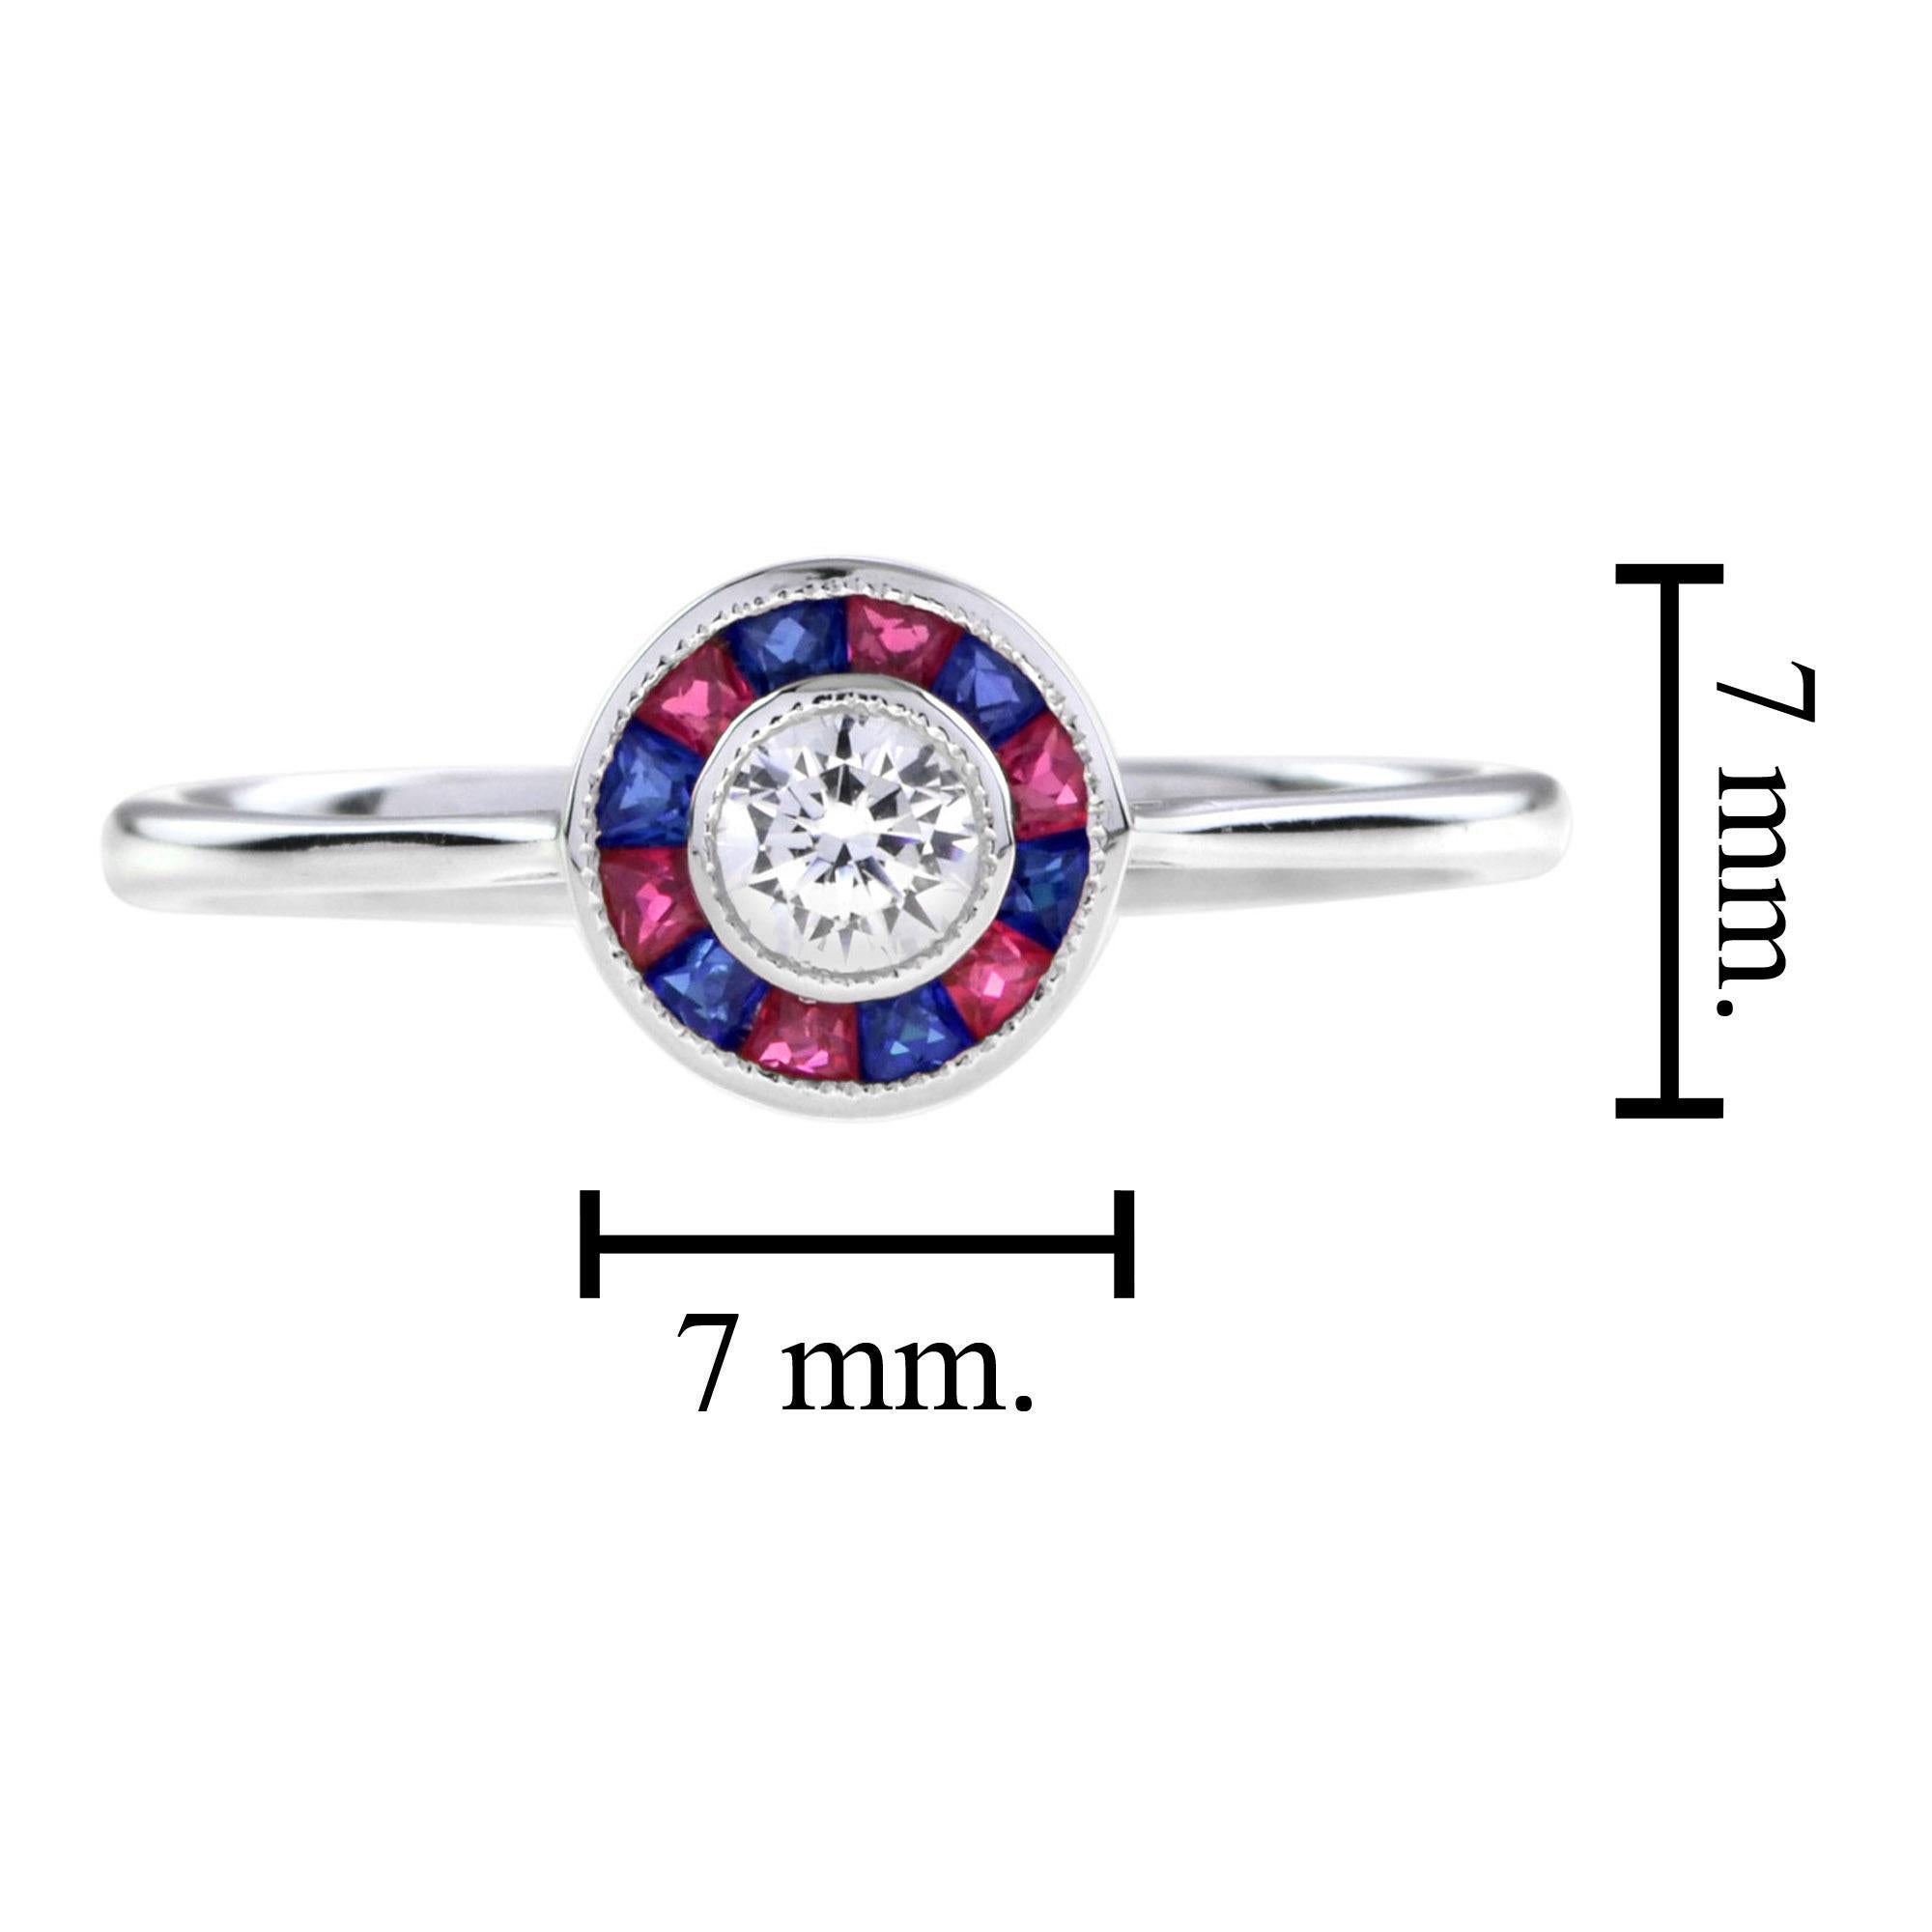 For Sale:  Art Deco Style 3.5 mm. Diamond with Ruby and Sapphire Target Ring in White Gold 7